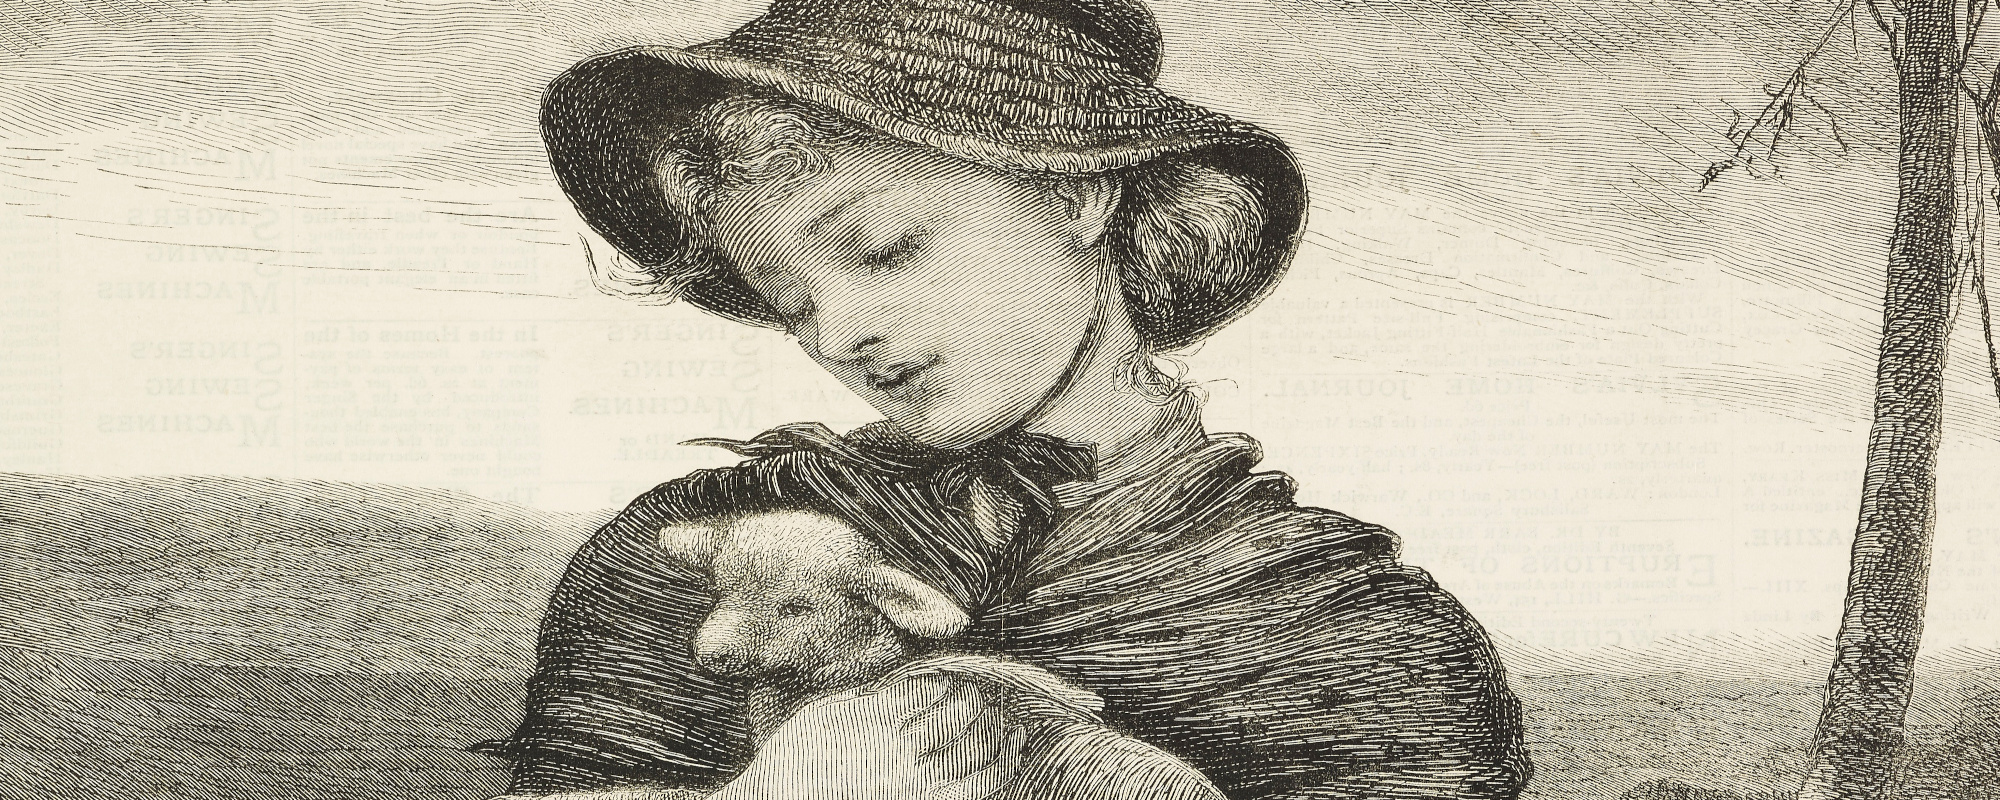 A drawing of girl holding a lamb represents the nursery rhyme "Mary Had A Little Lamb."